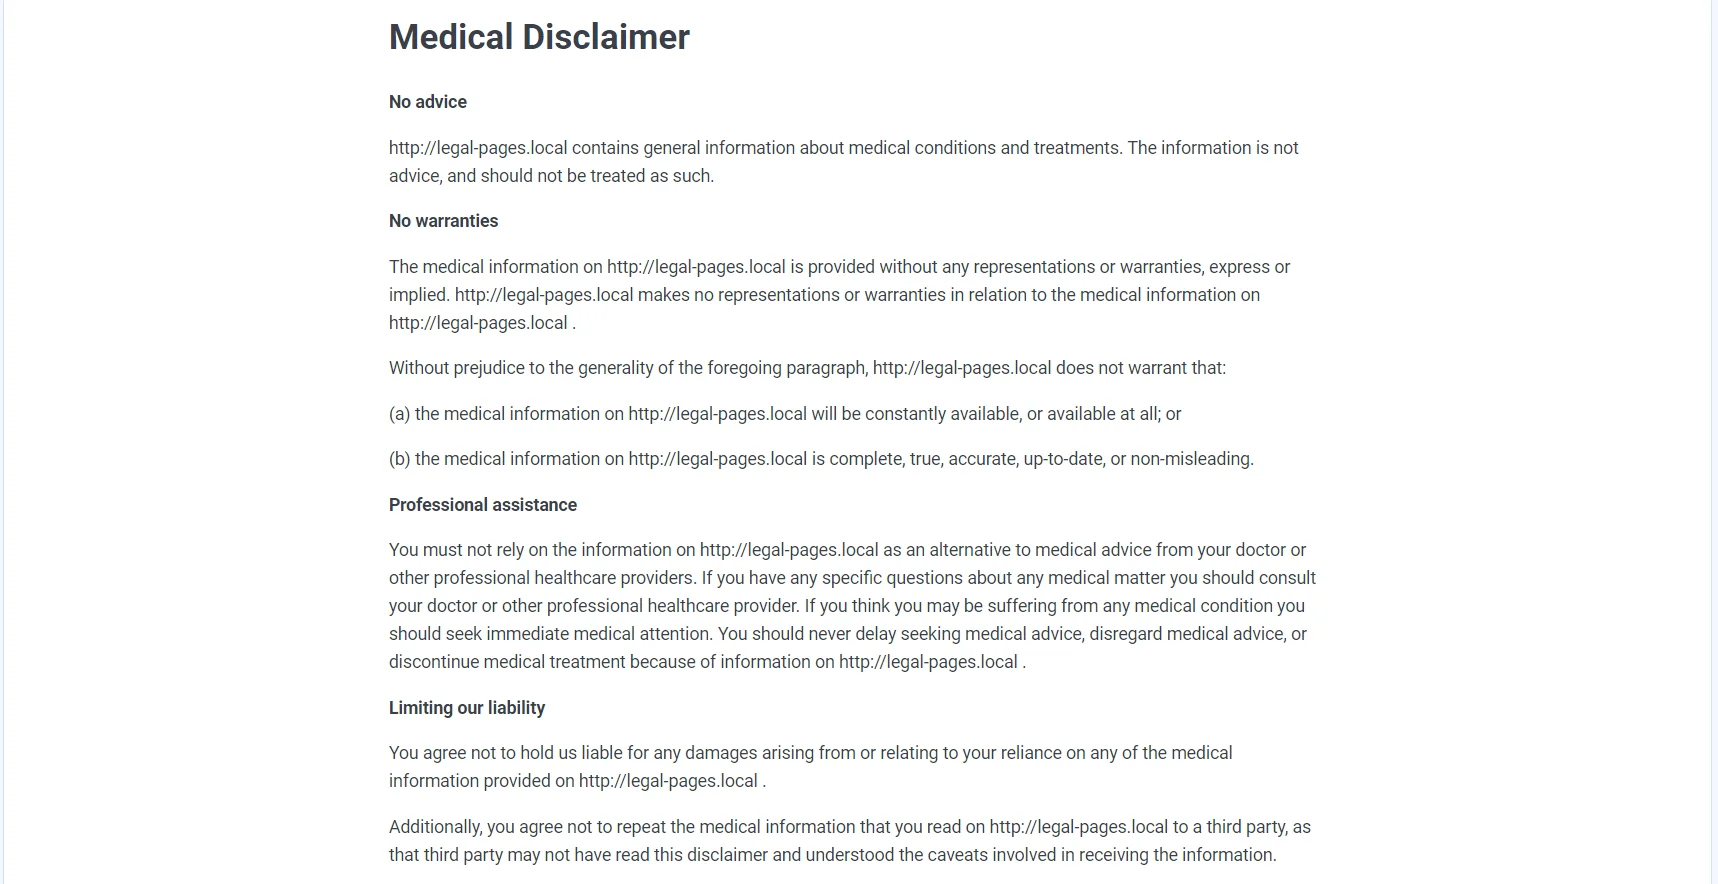 Medical Disclaimer is ready